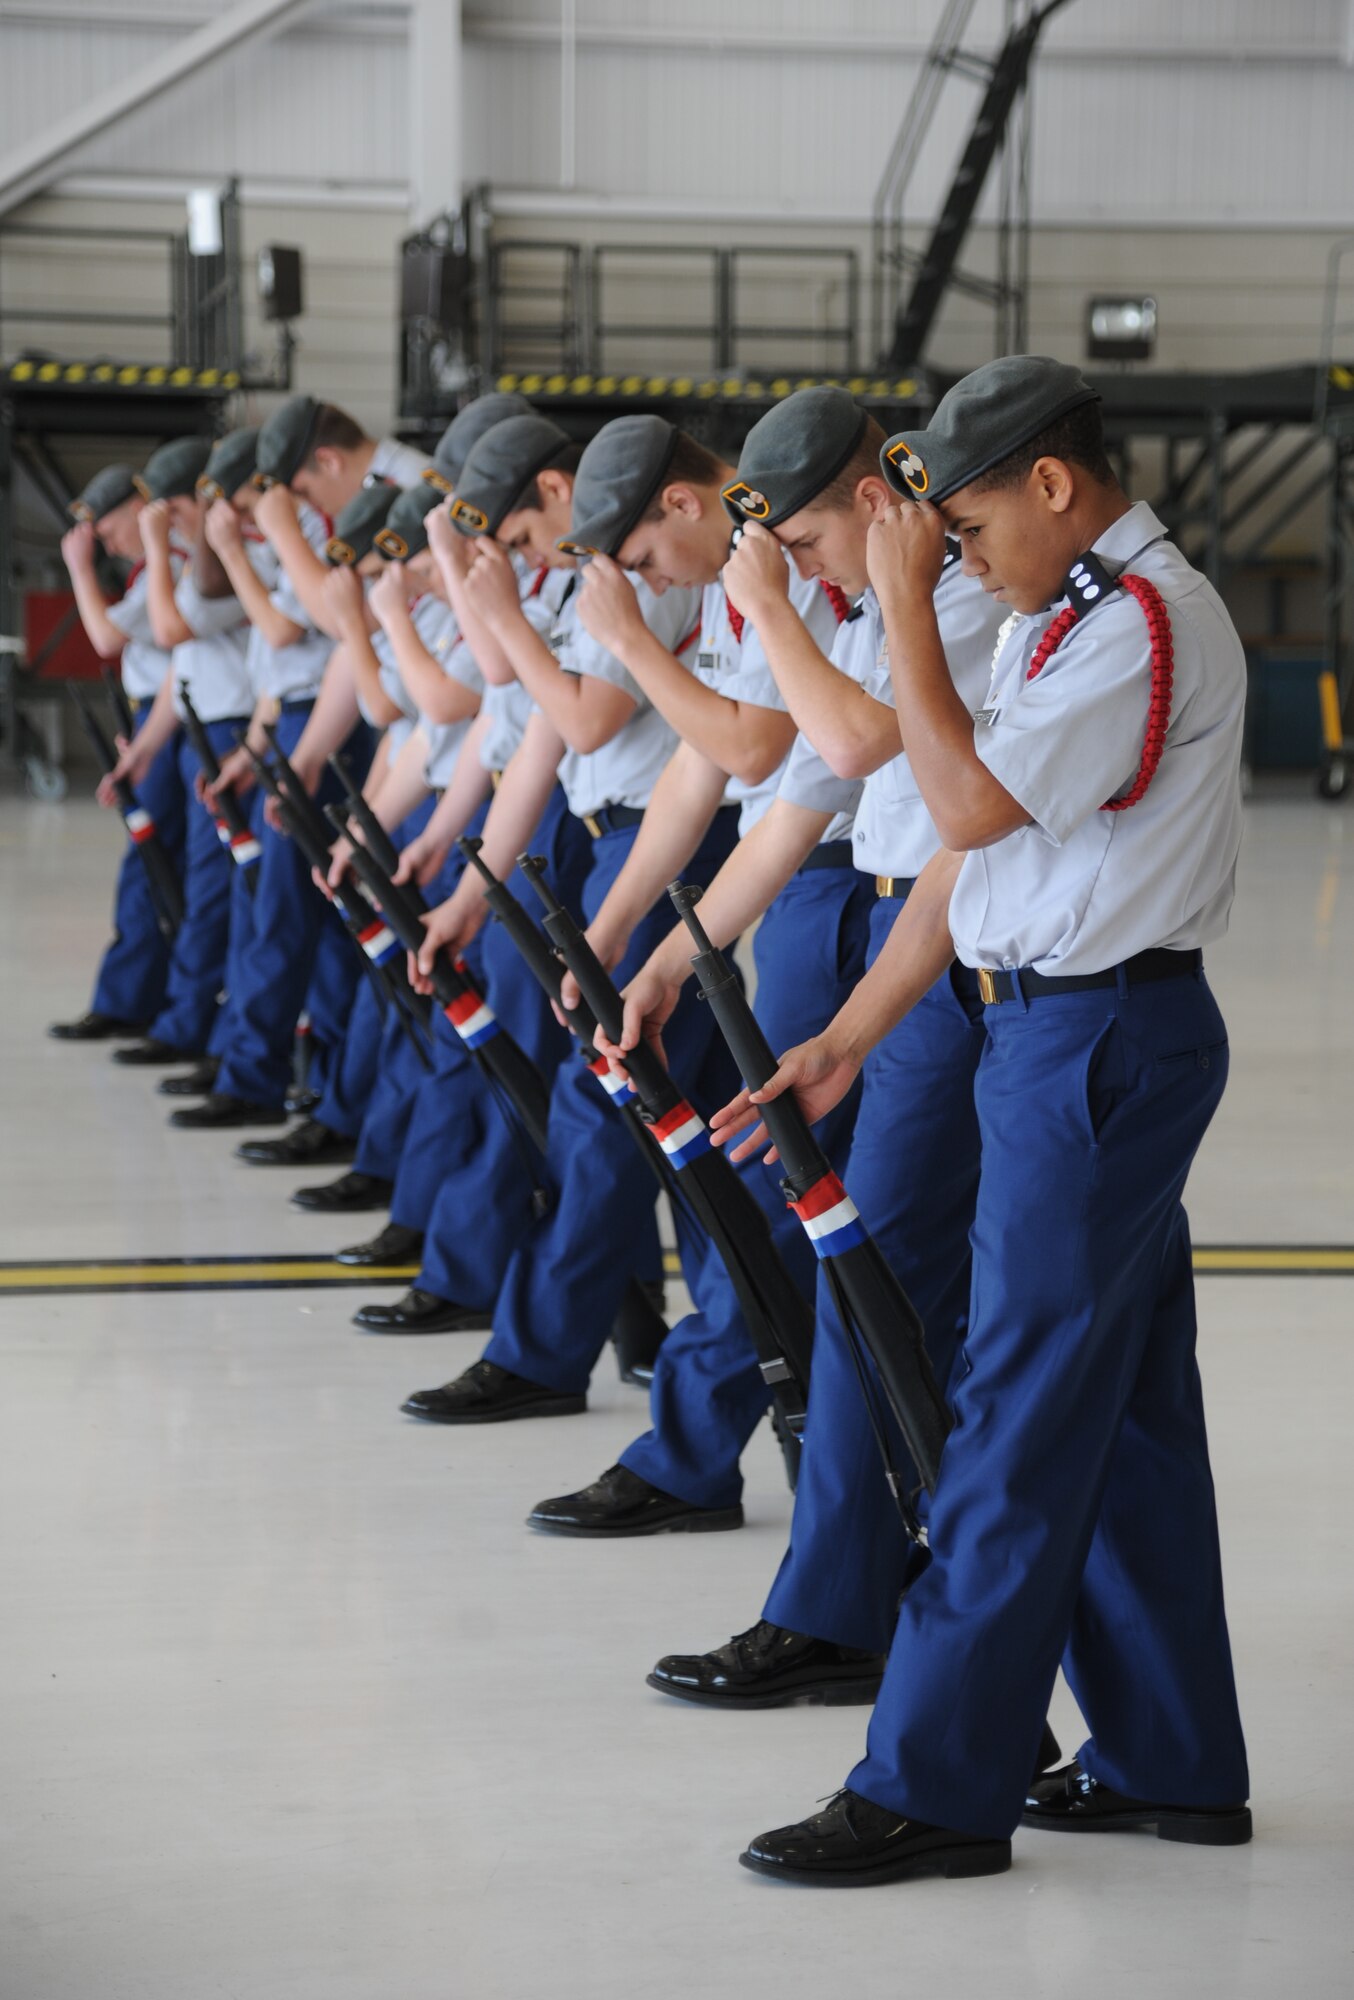 Members of the Army Junior ROTC from McLaurin High School, Florence, Miss., perform in the armed exhibition during the Inaugural Mississippi Joint Service-Junior ROTC All Drill Competition Nov. 15, 2014, inside the 403rd Wing dual hangar at Keesler Air Force Base, Miss. Eighteen Junior ROTC teams from multiple military branches were represented at the event. (U.S. Air Force photo by Kemberly Groue)